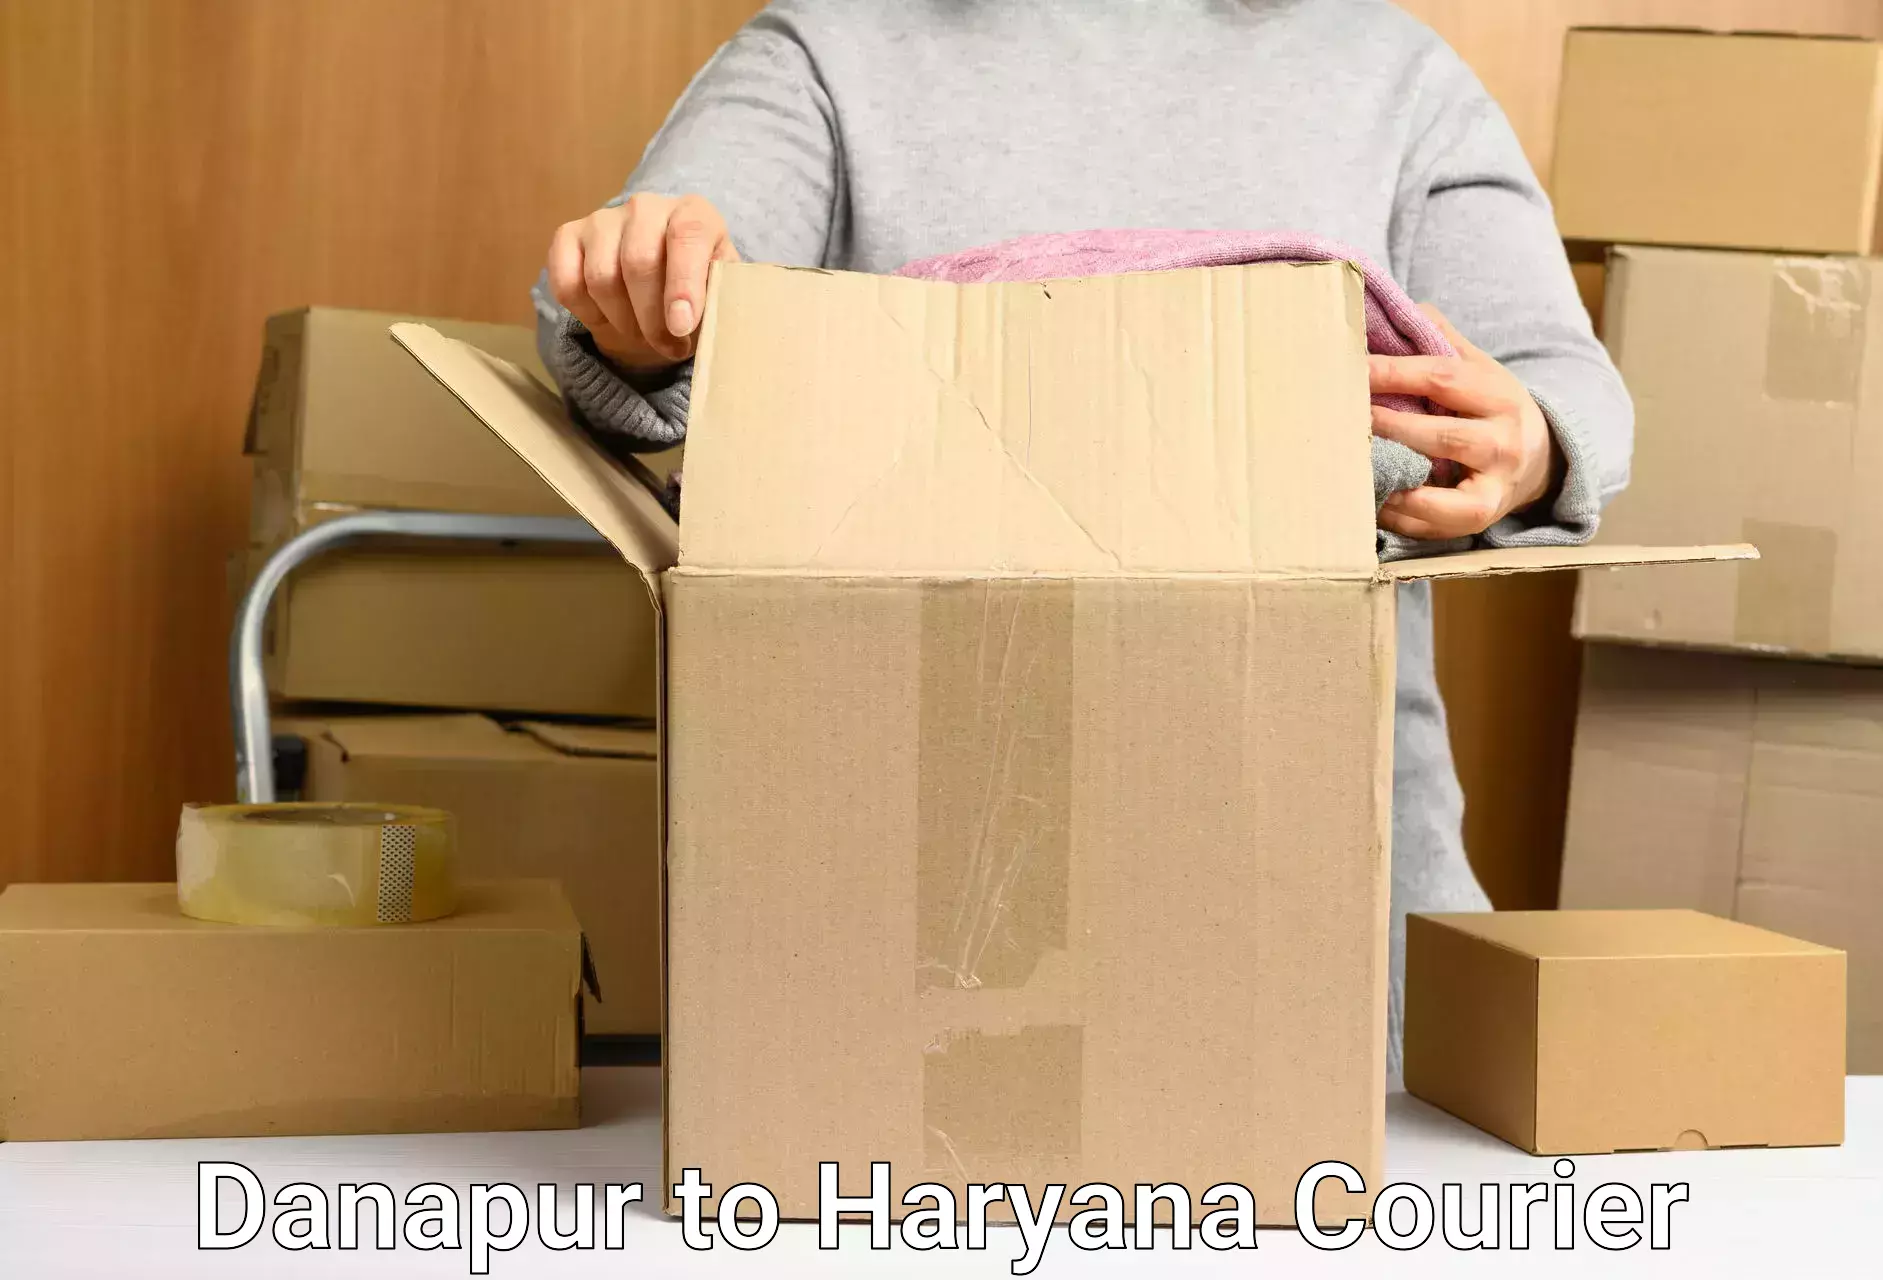 Customer-friendly courier services Danapur to Chaudhary Charan Singh Haryana Agricultural University Hisar